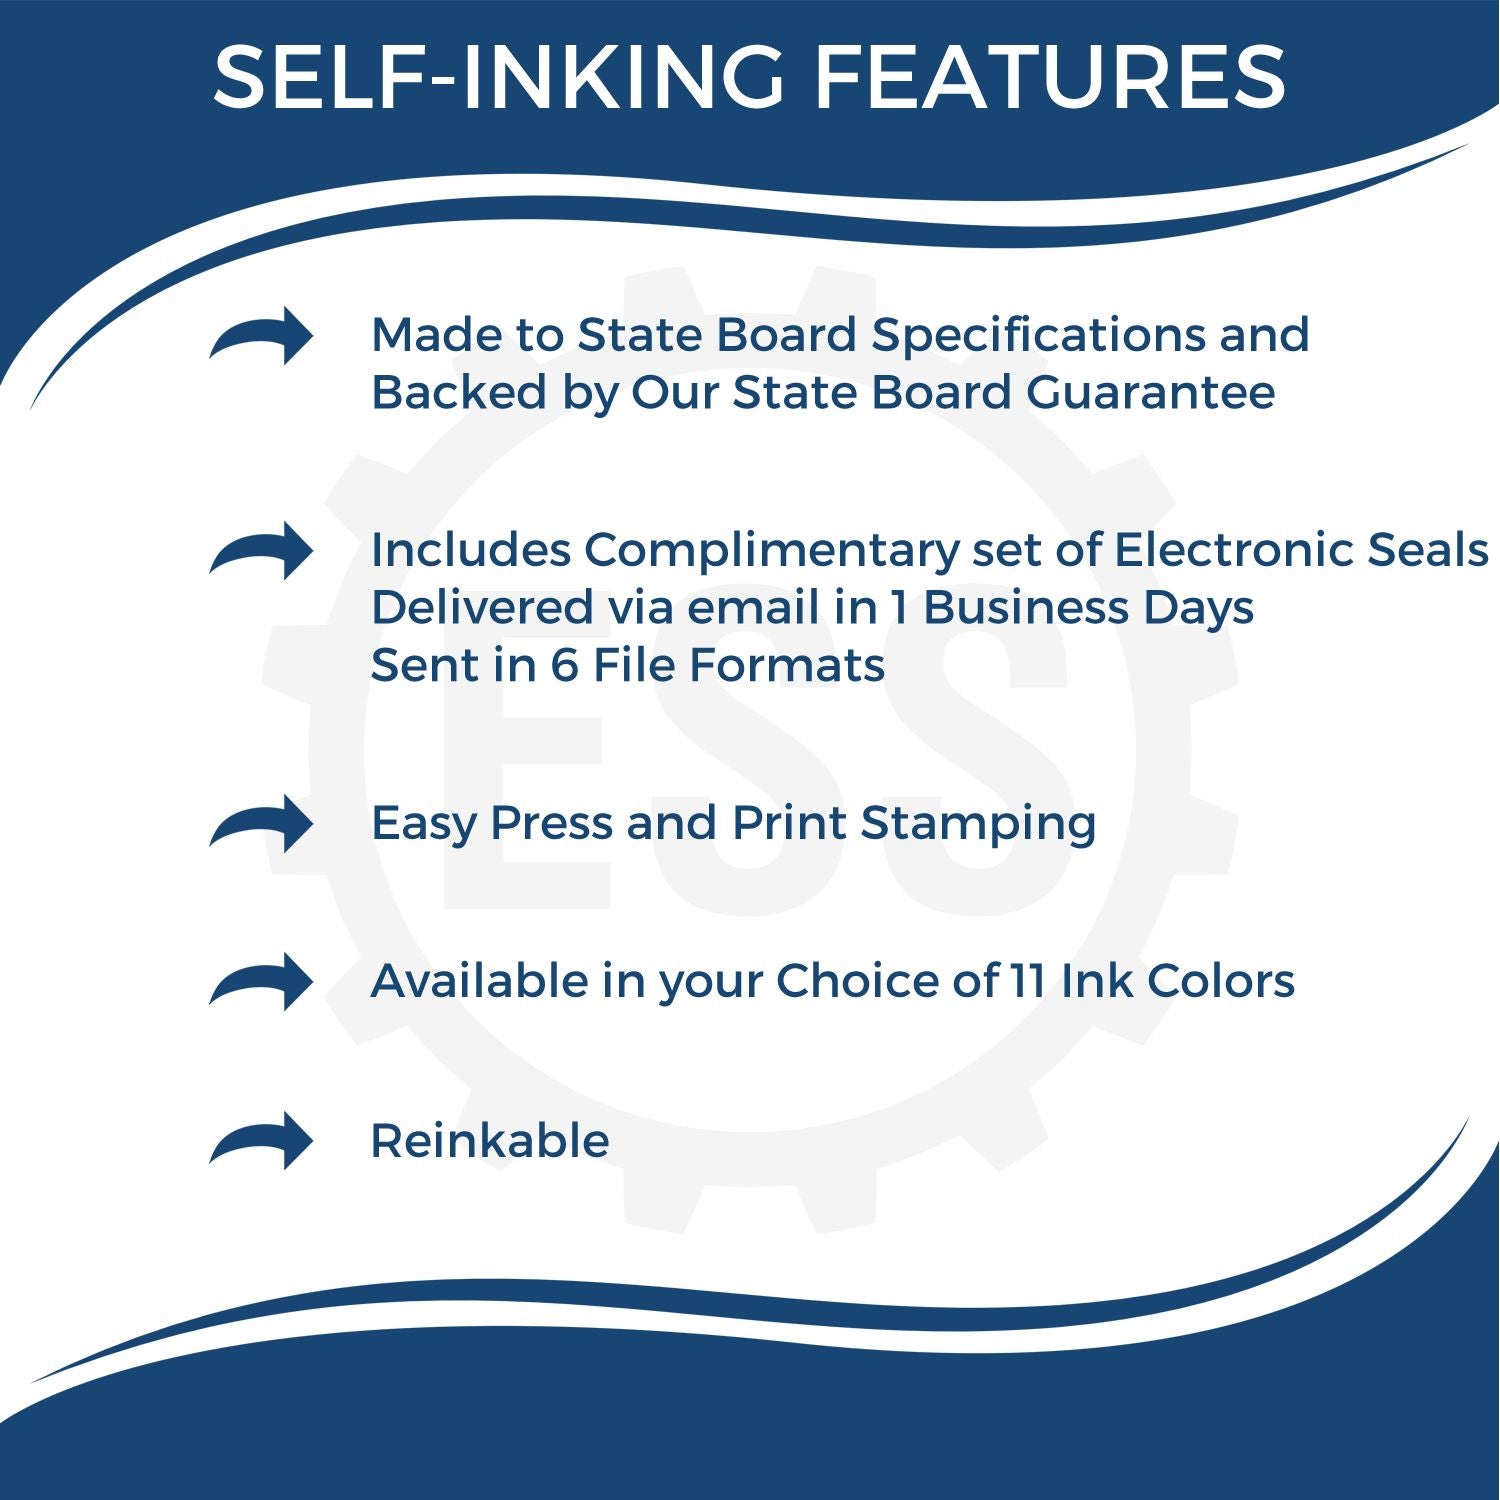 A picture of an infographic highlighting the selling points for the Self-Inking Michigan Landscape Architect Stamp